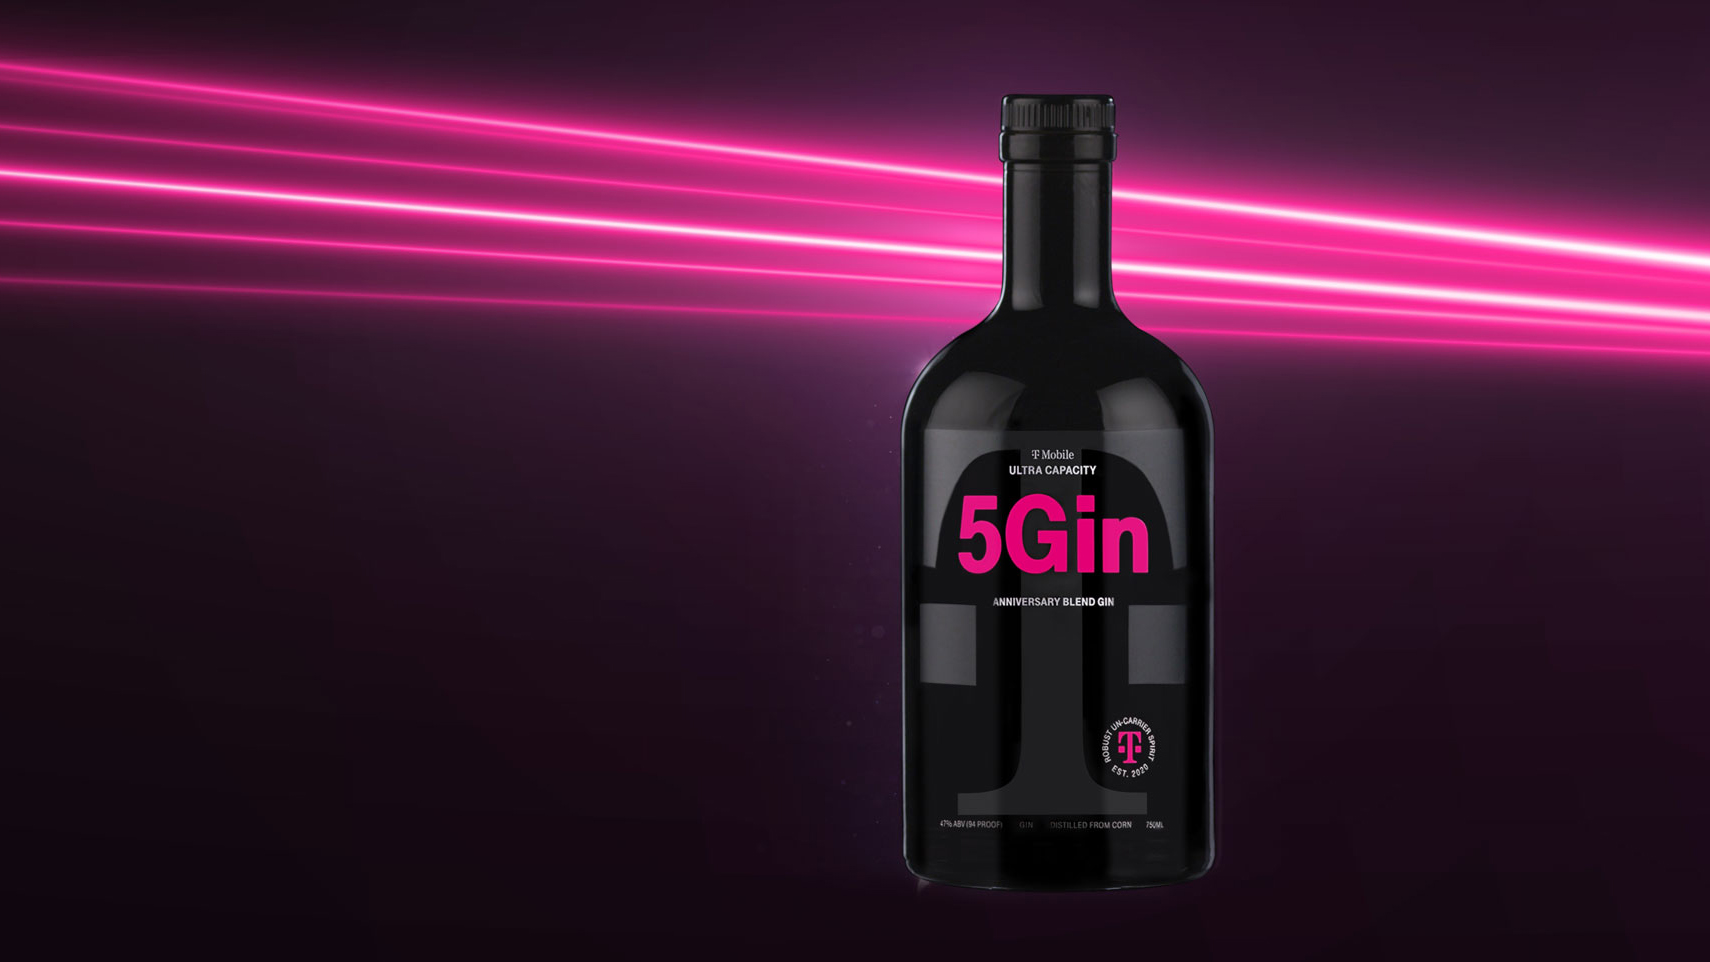 T-Mobile 5G Gin 5Gin